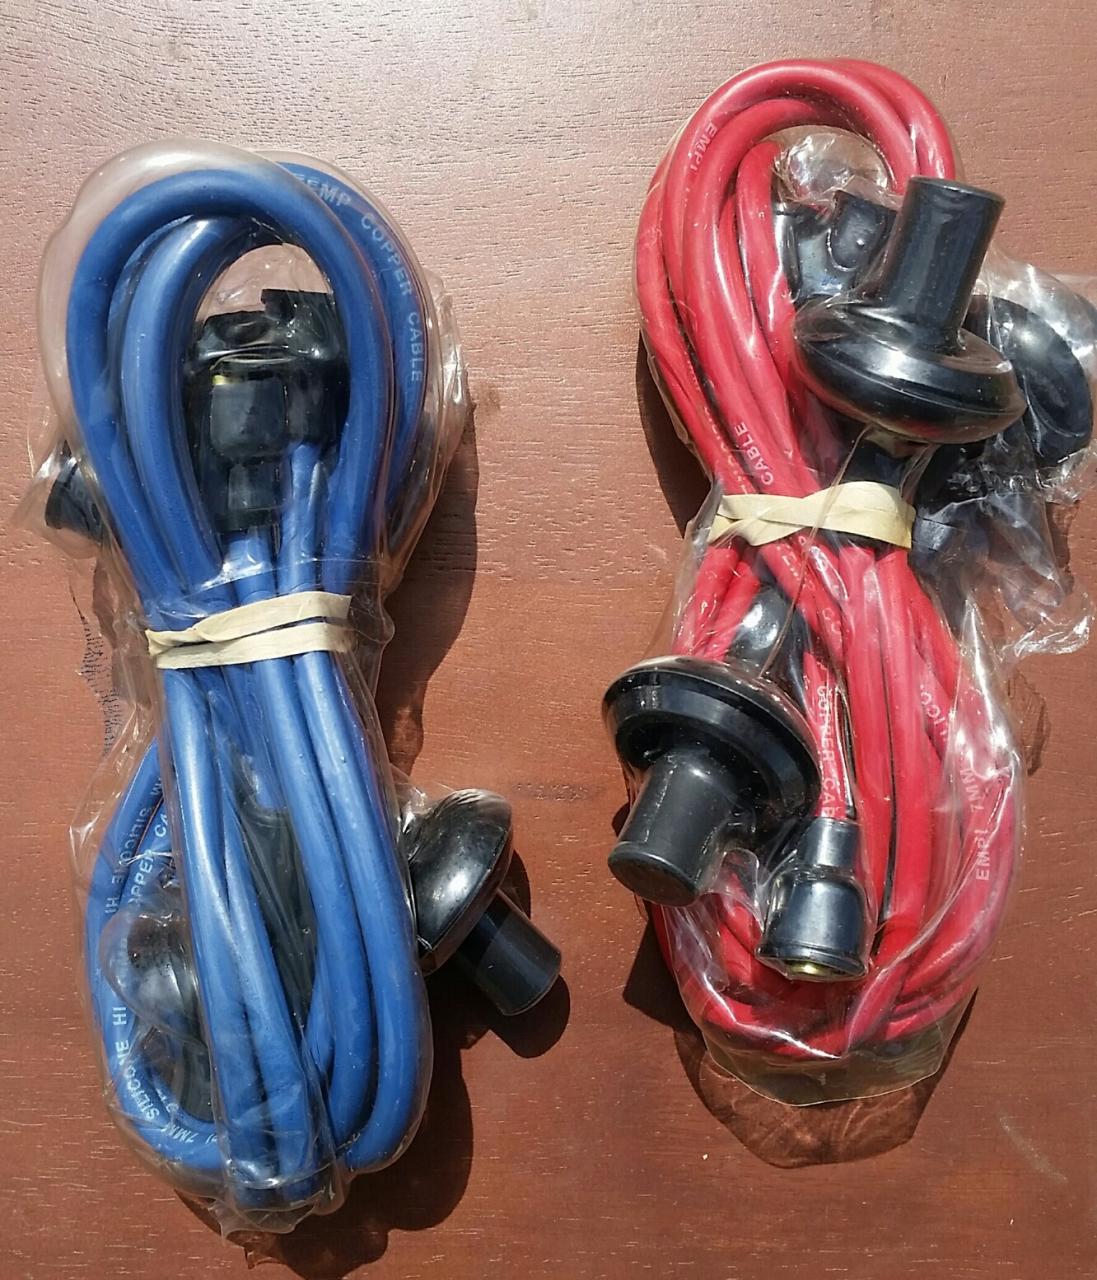 VW Spark Plug Wire Sets (2) Blue & Red
7mm Silicone EMPI
Image 1 of 2